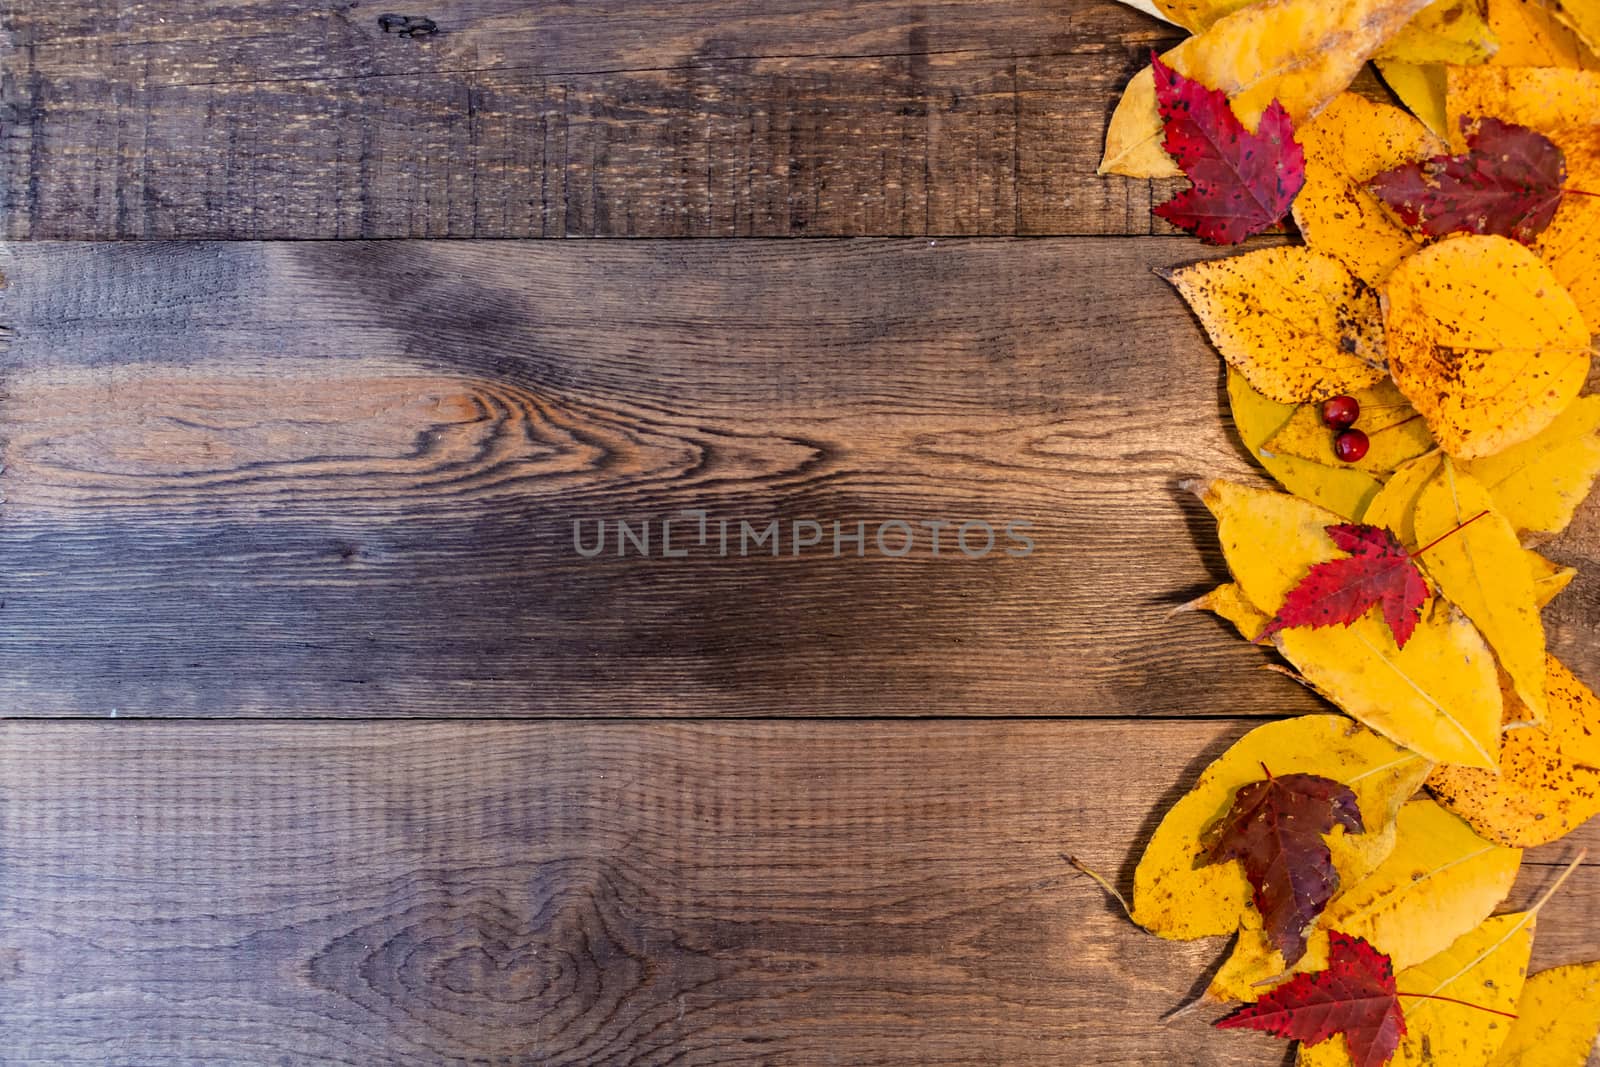 Red, yellow, orange autumn leaves, as well as berries and cones lie on wooden boards. Background image.